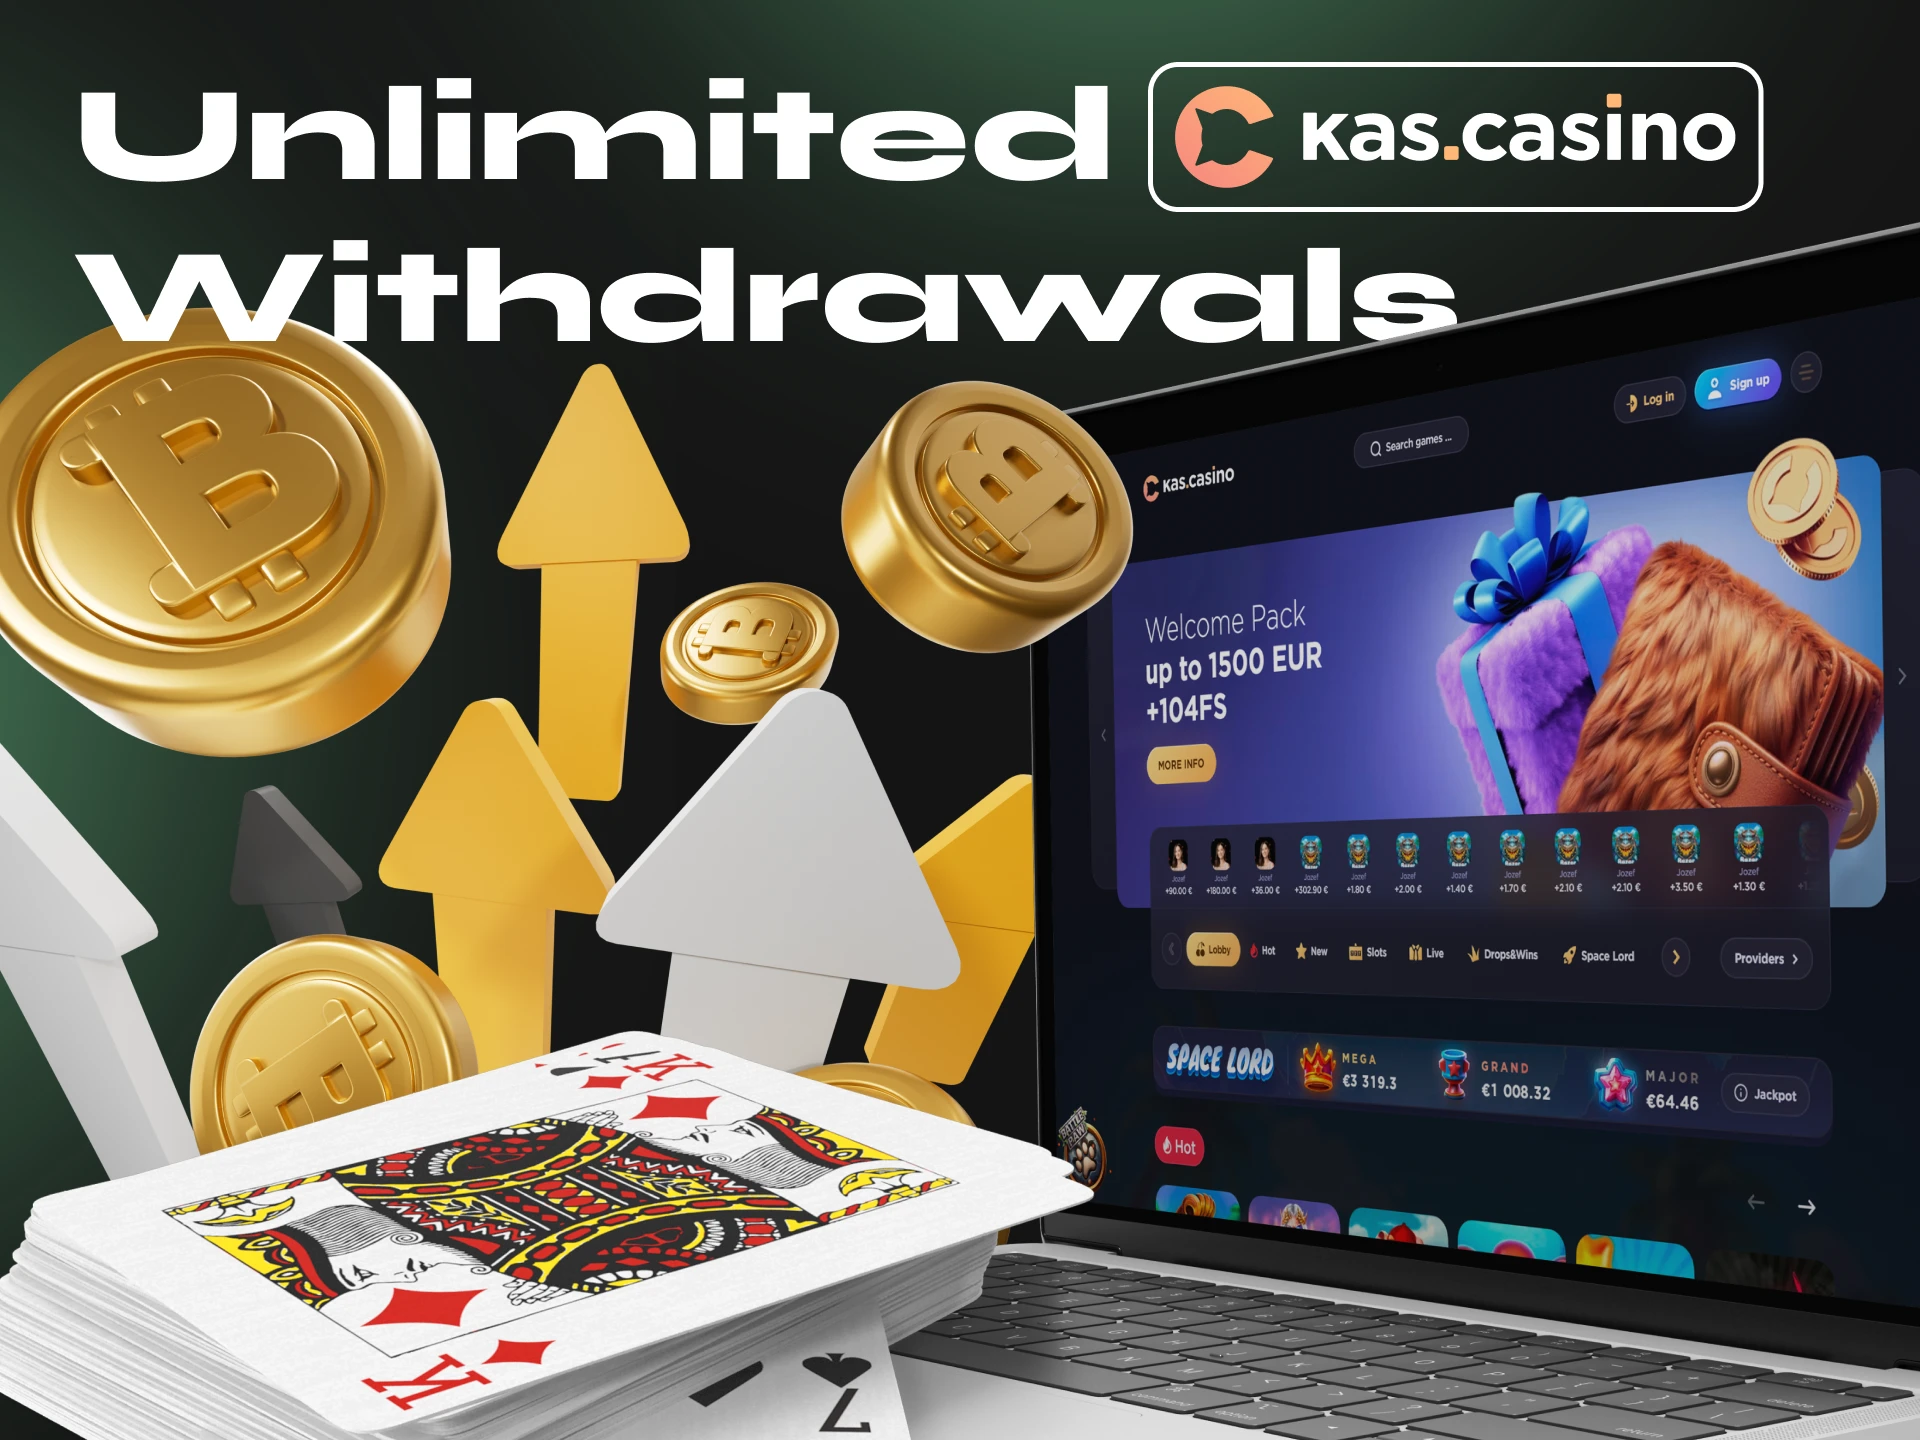 Withdraw your blackjack winnings without limits at Kas Casino.